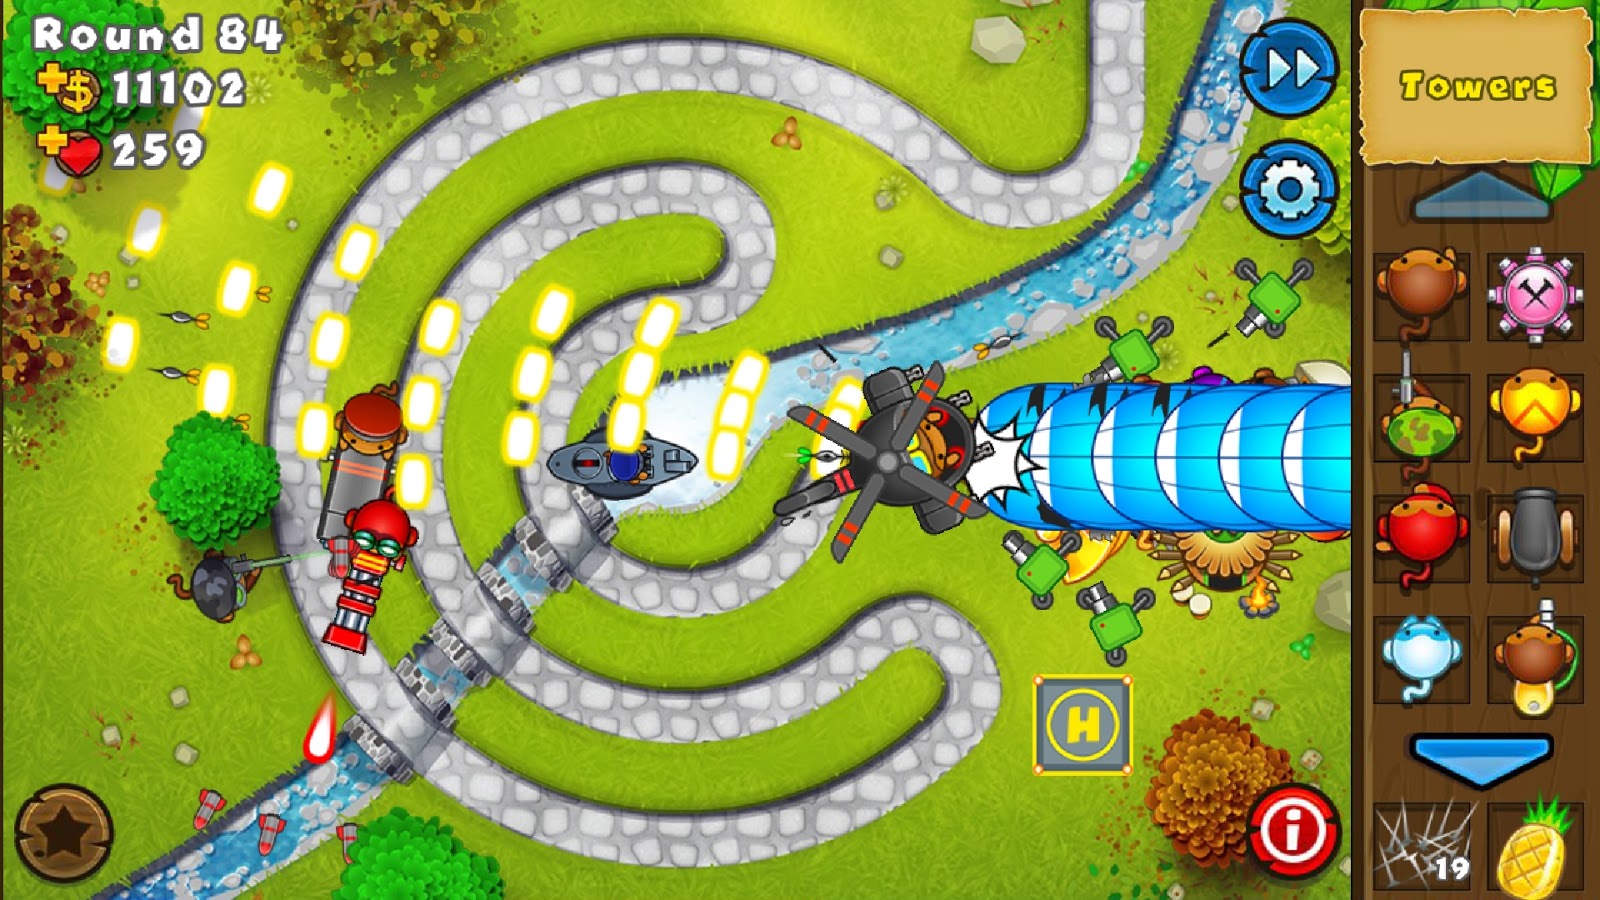 Bloons Tower Defense 5 Unblocked Games.com.